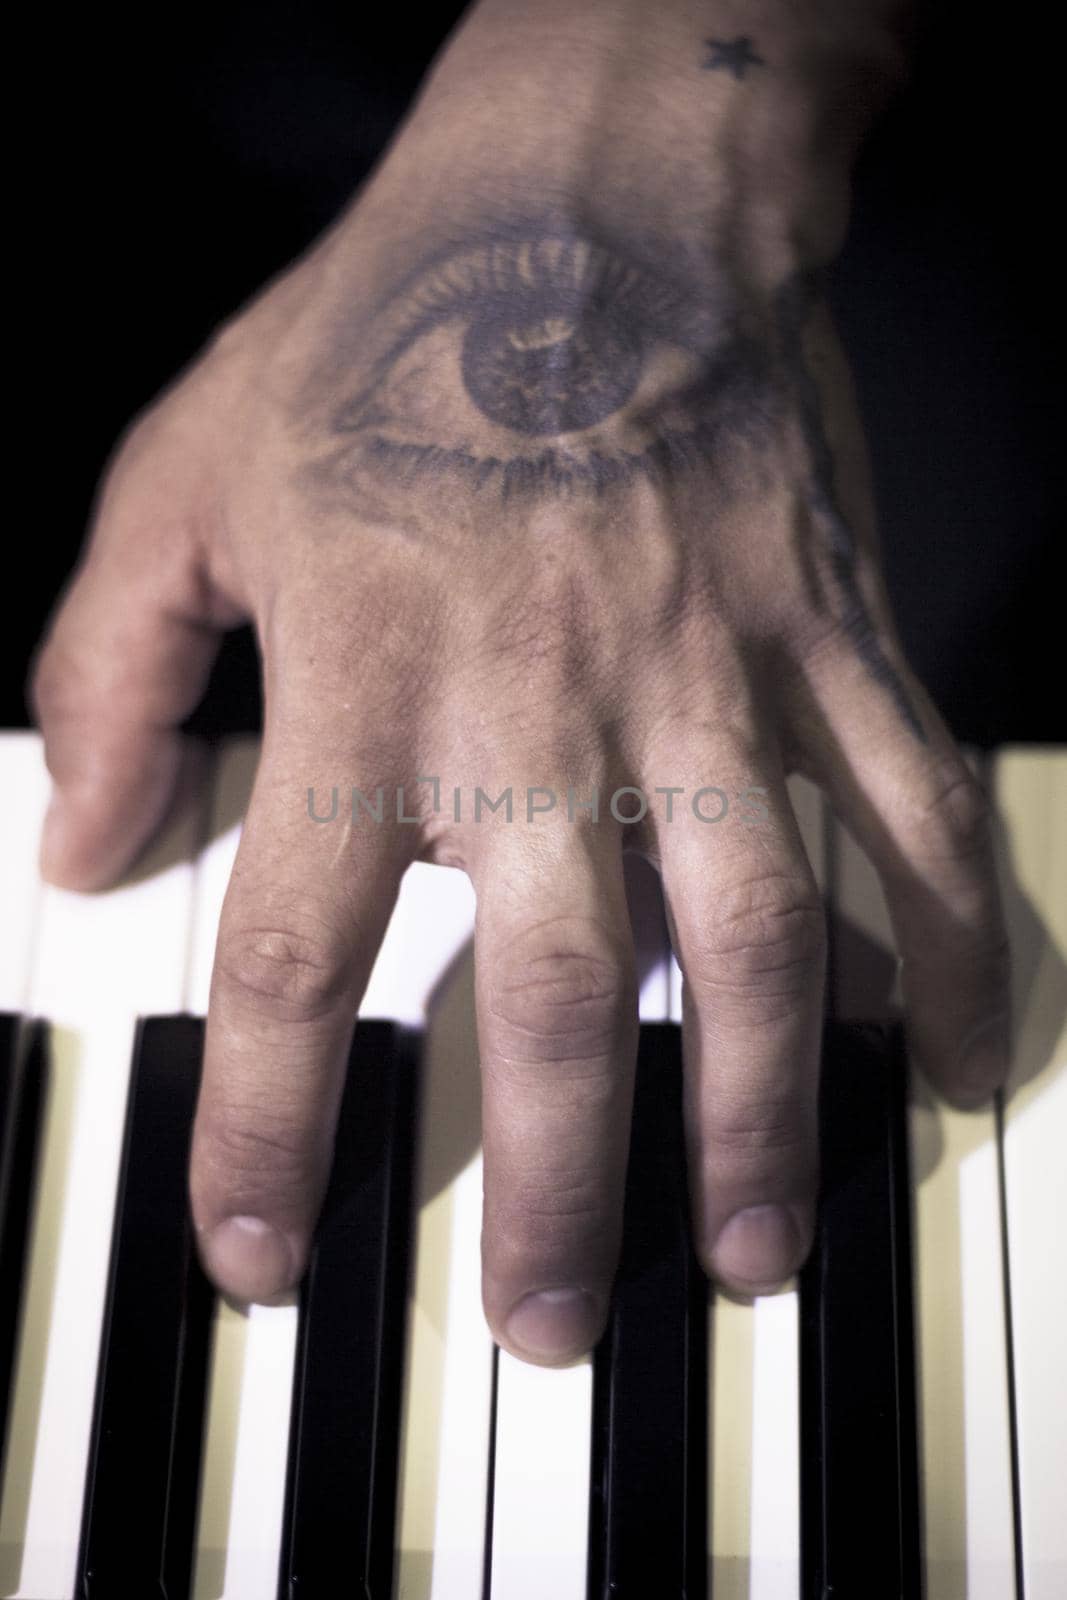 Tattooed mans hands on the keyboard of a piano. Dark background